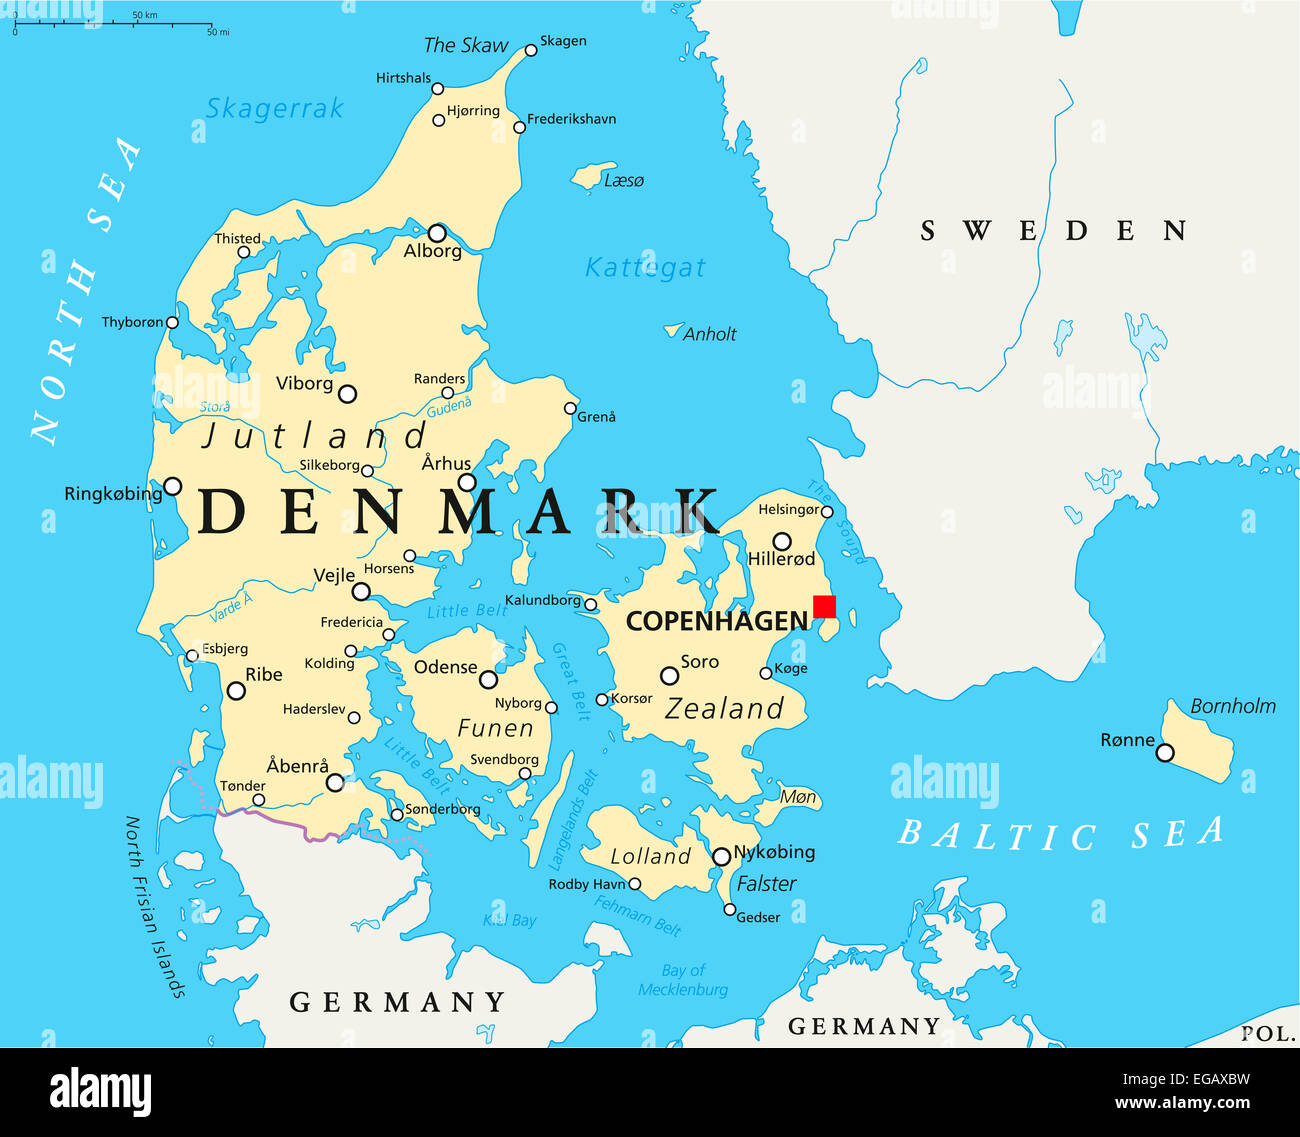 Denmark Political Map with capital Copenhagen, national borders, important cities and rivers. English labeling and scaling. Stock Photo